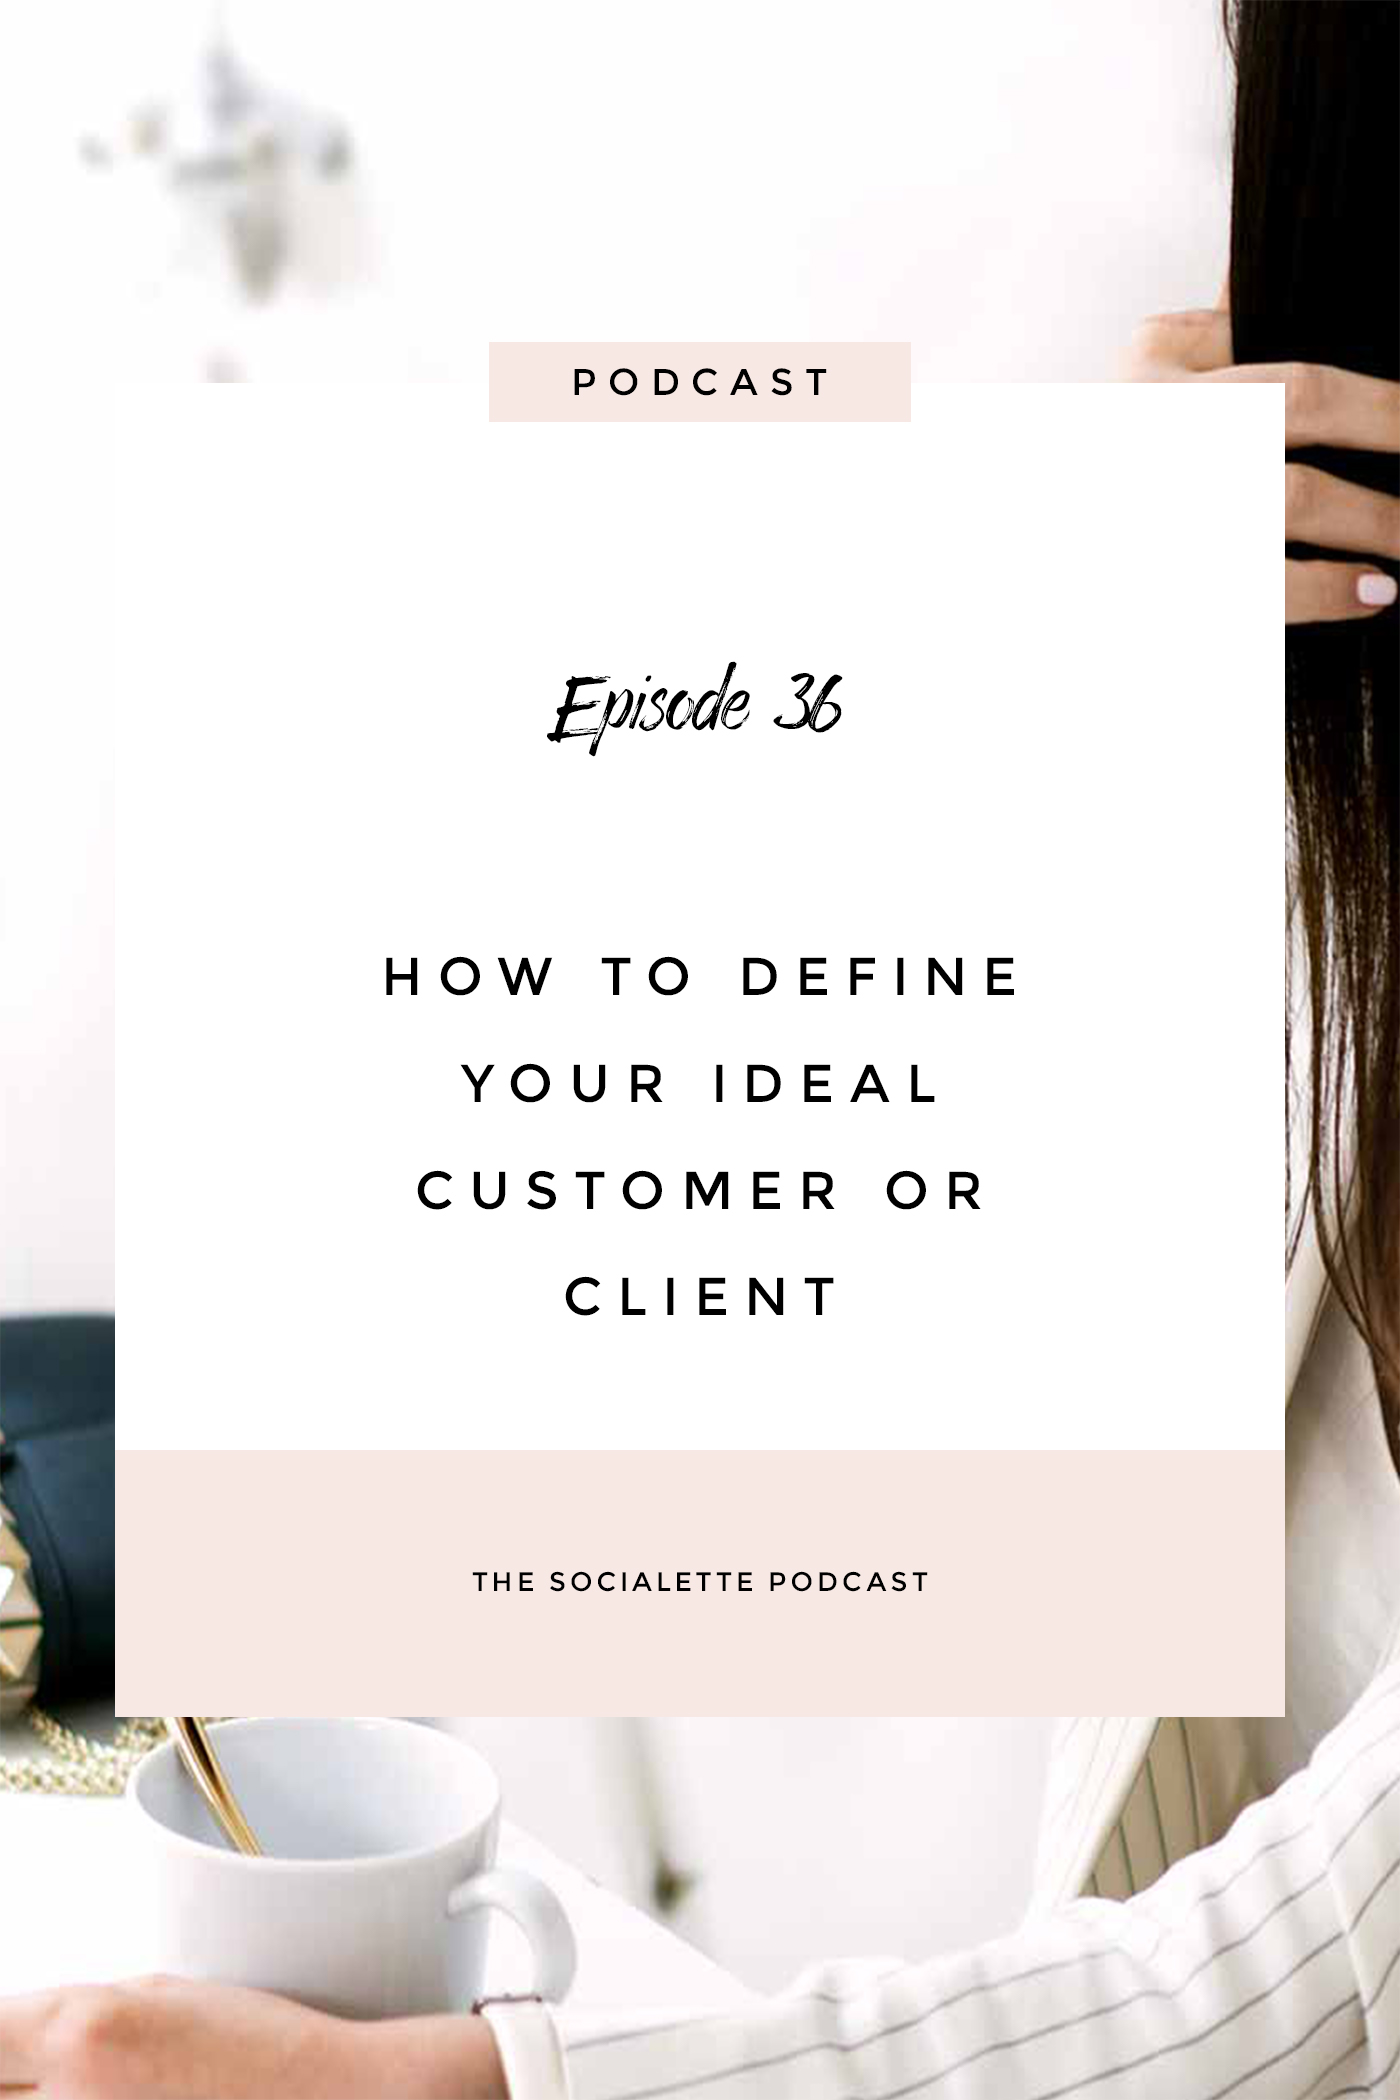 How to define your ideal customer or client